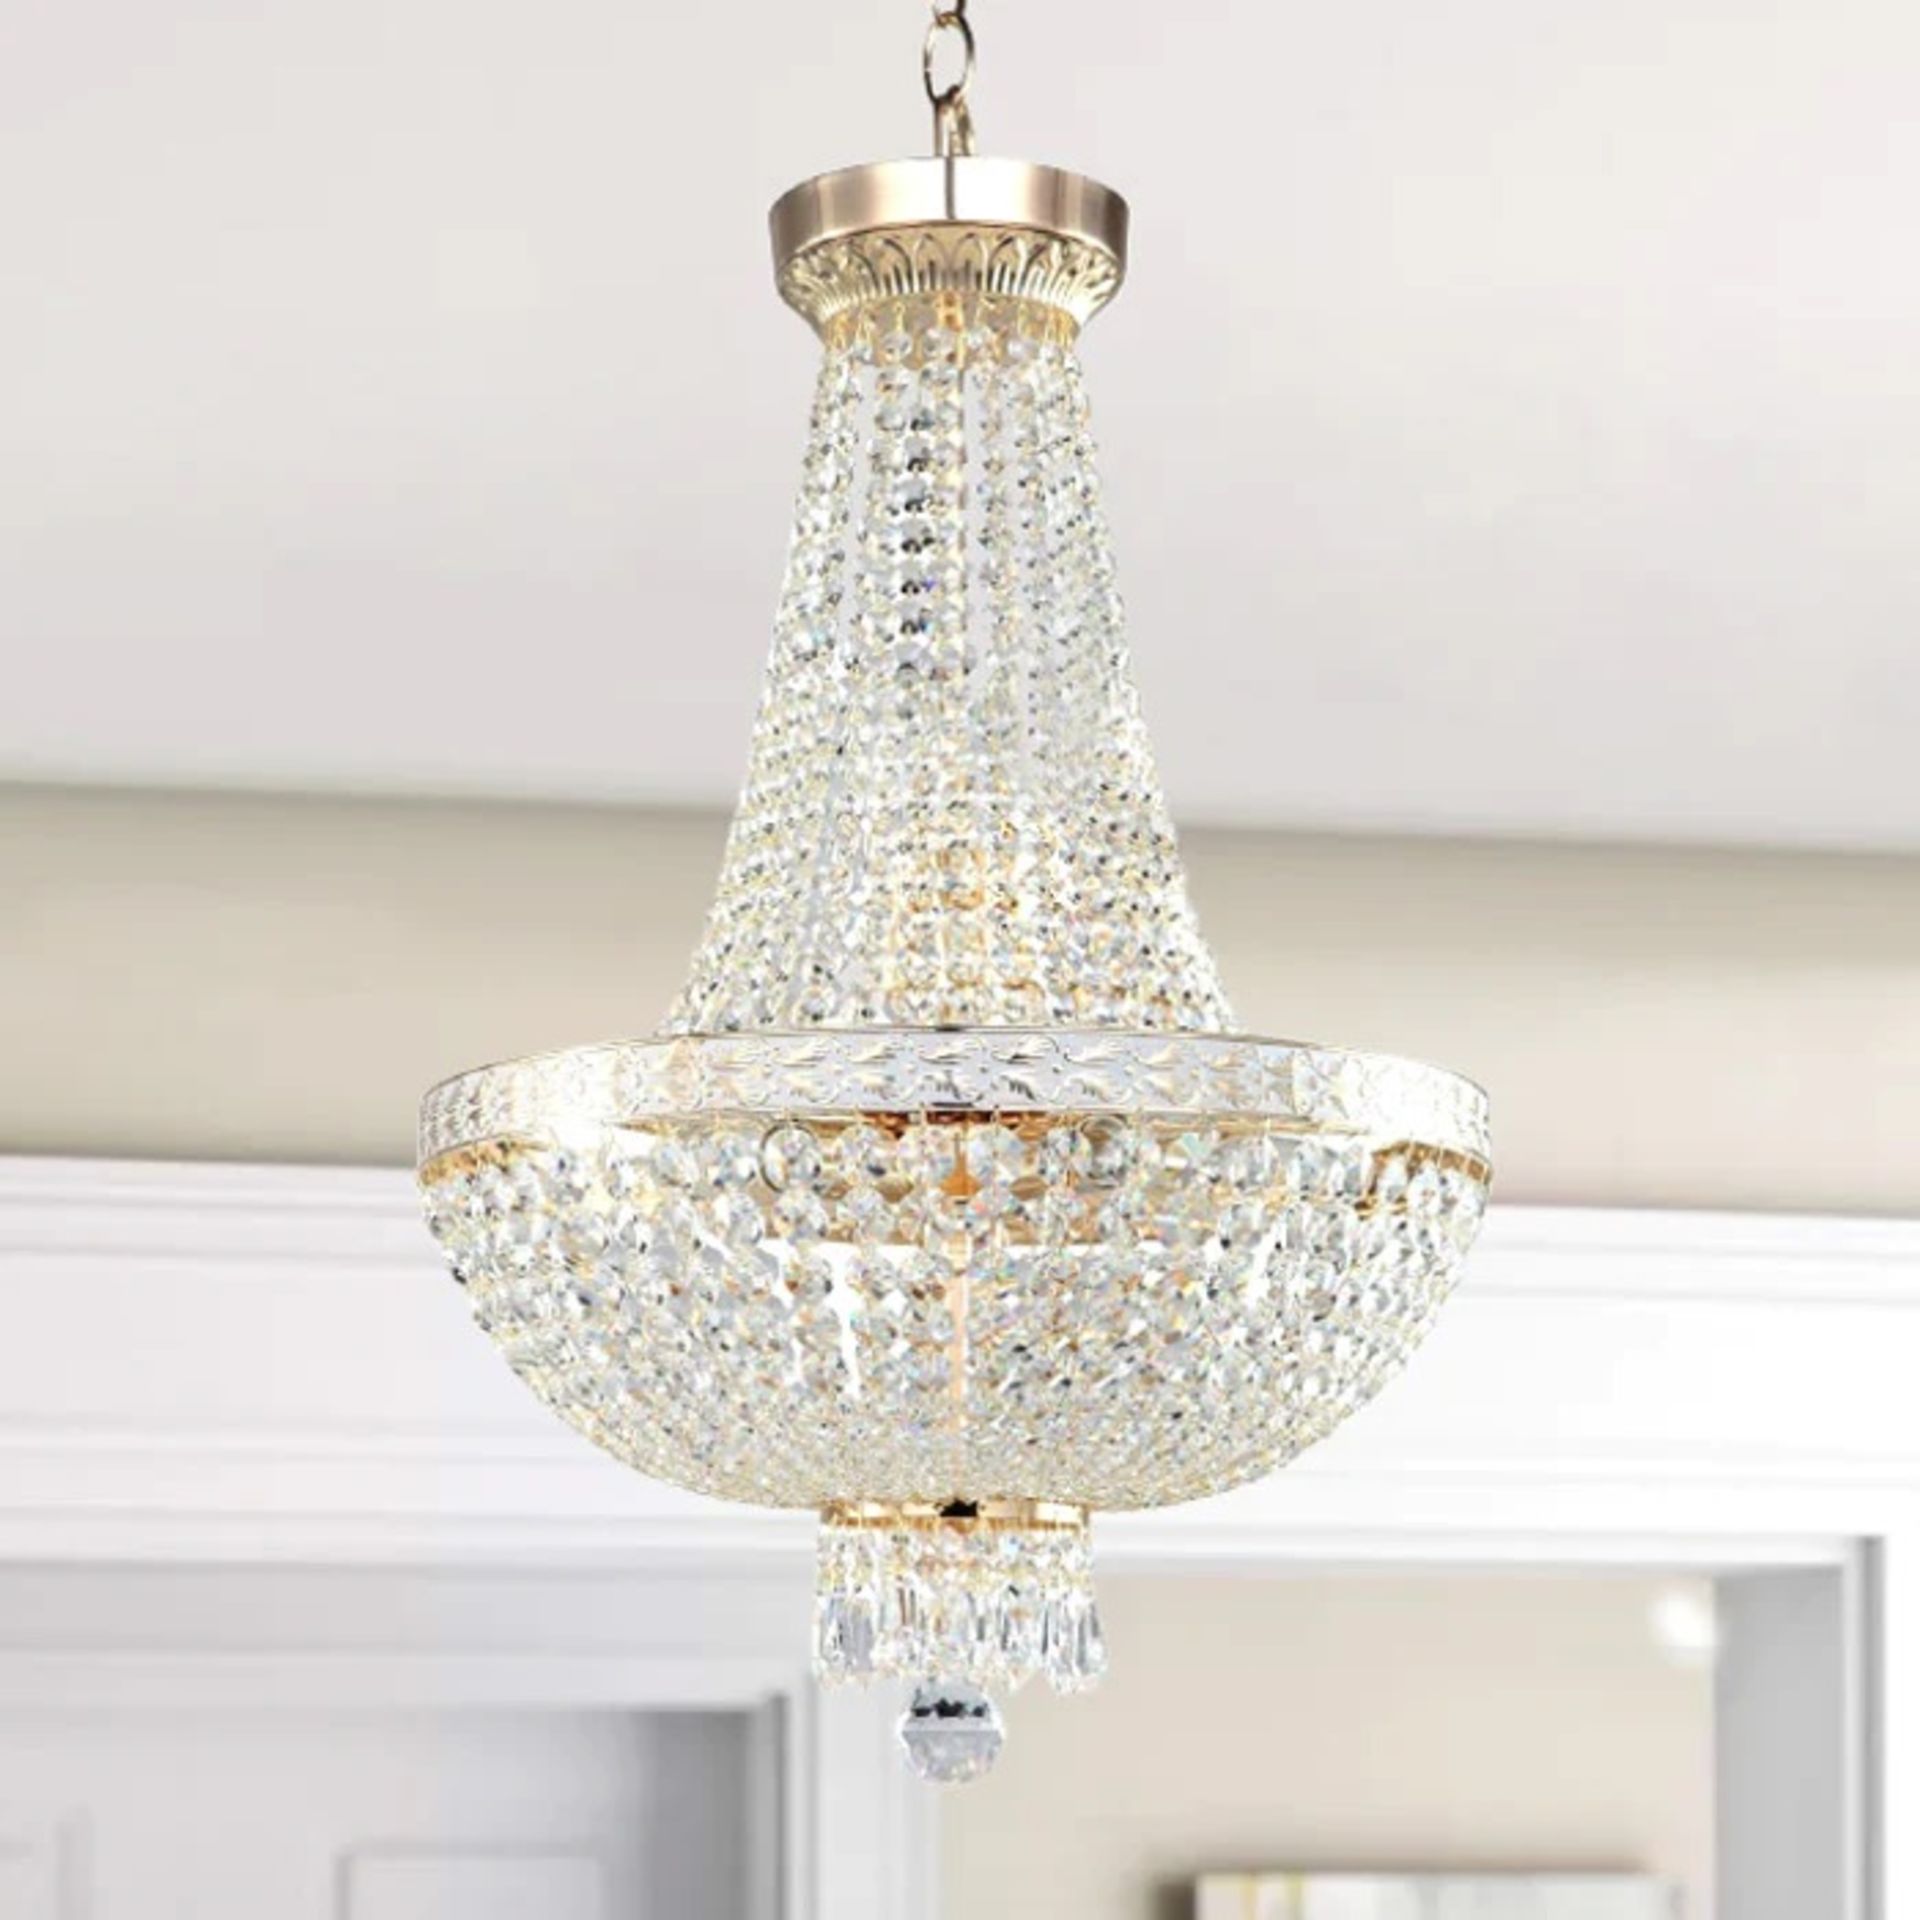 Empire Style Crystal Chandelier With A Height Maximum Of 170cm Featuring A Gold Plated Frame, - Bild 2 aus 2